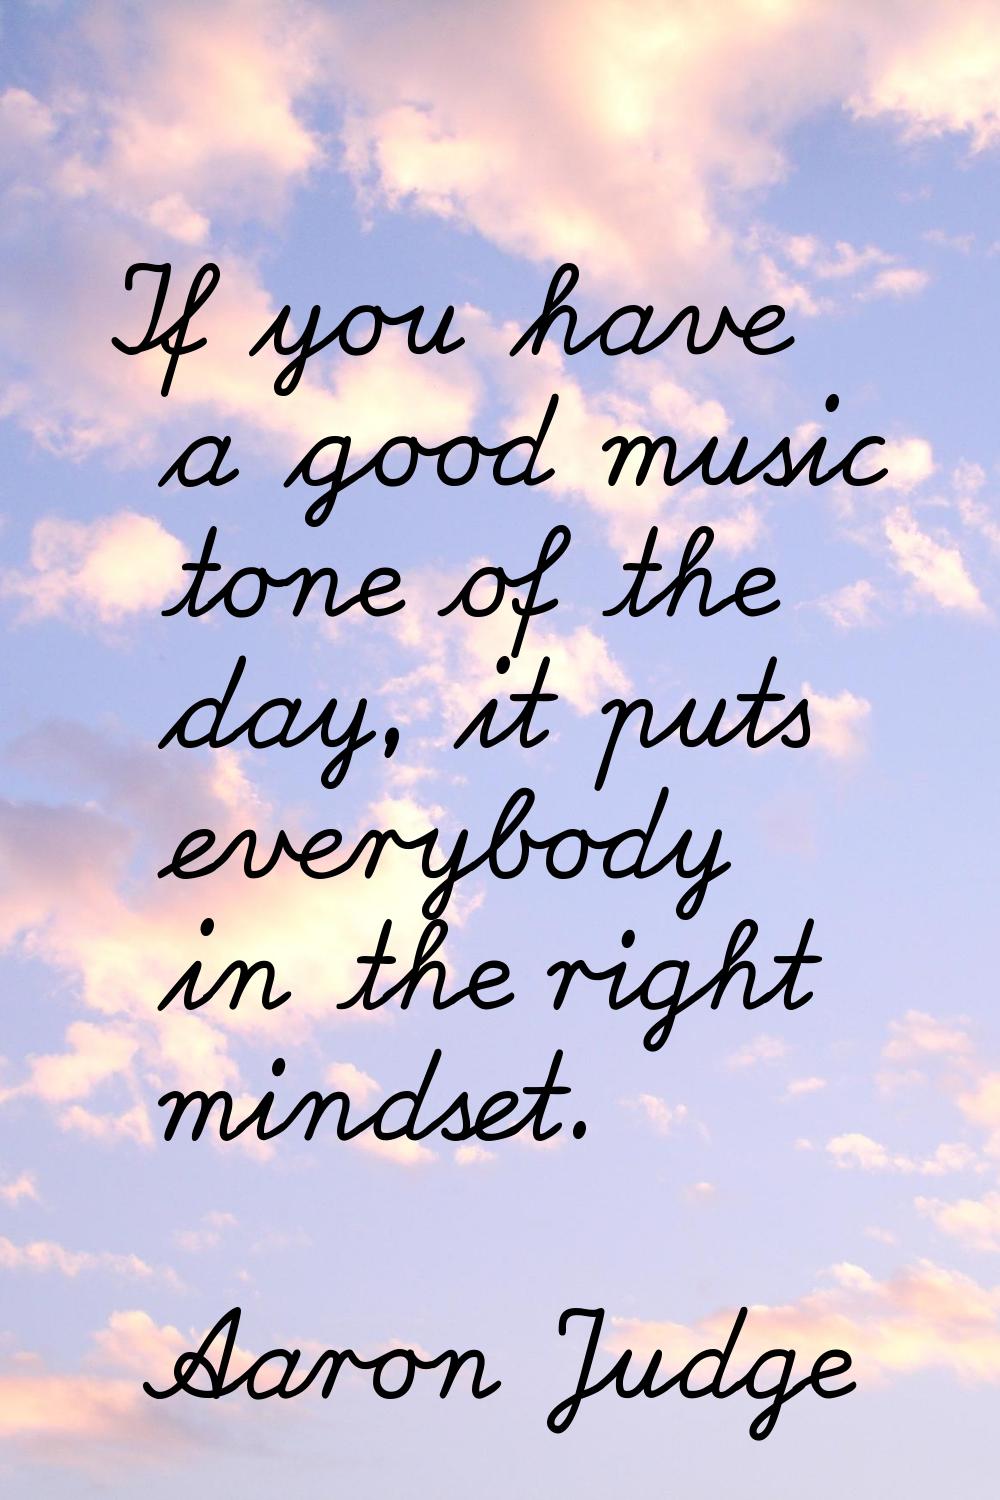 If you have a good music tone of the day, it puts everybody in the right mindset.